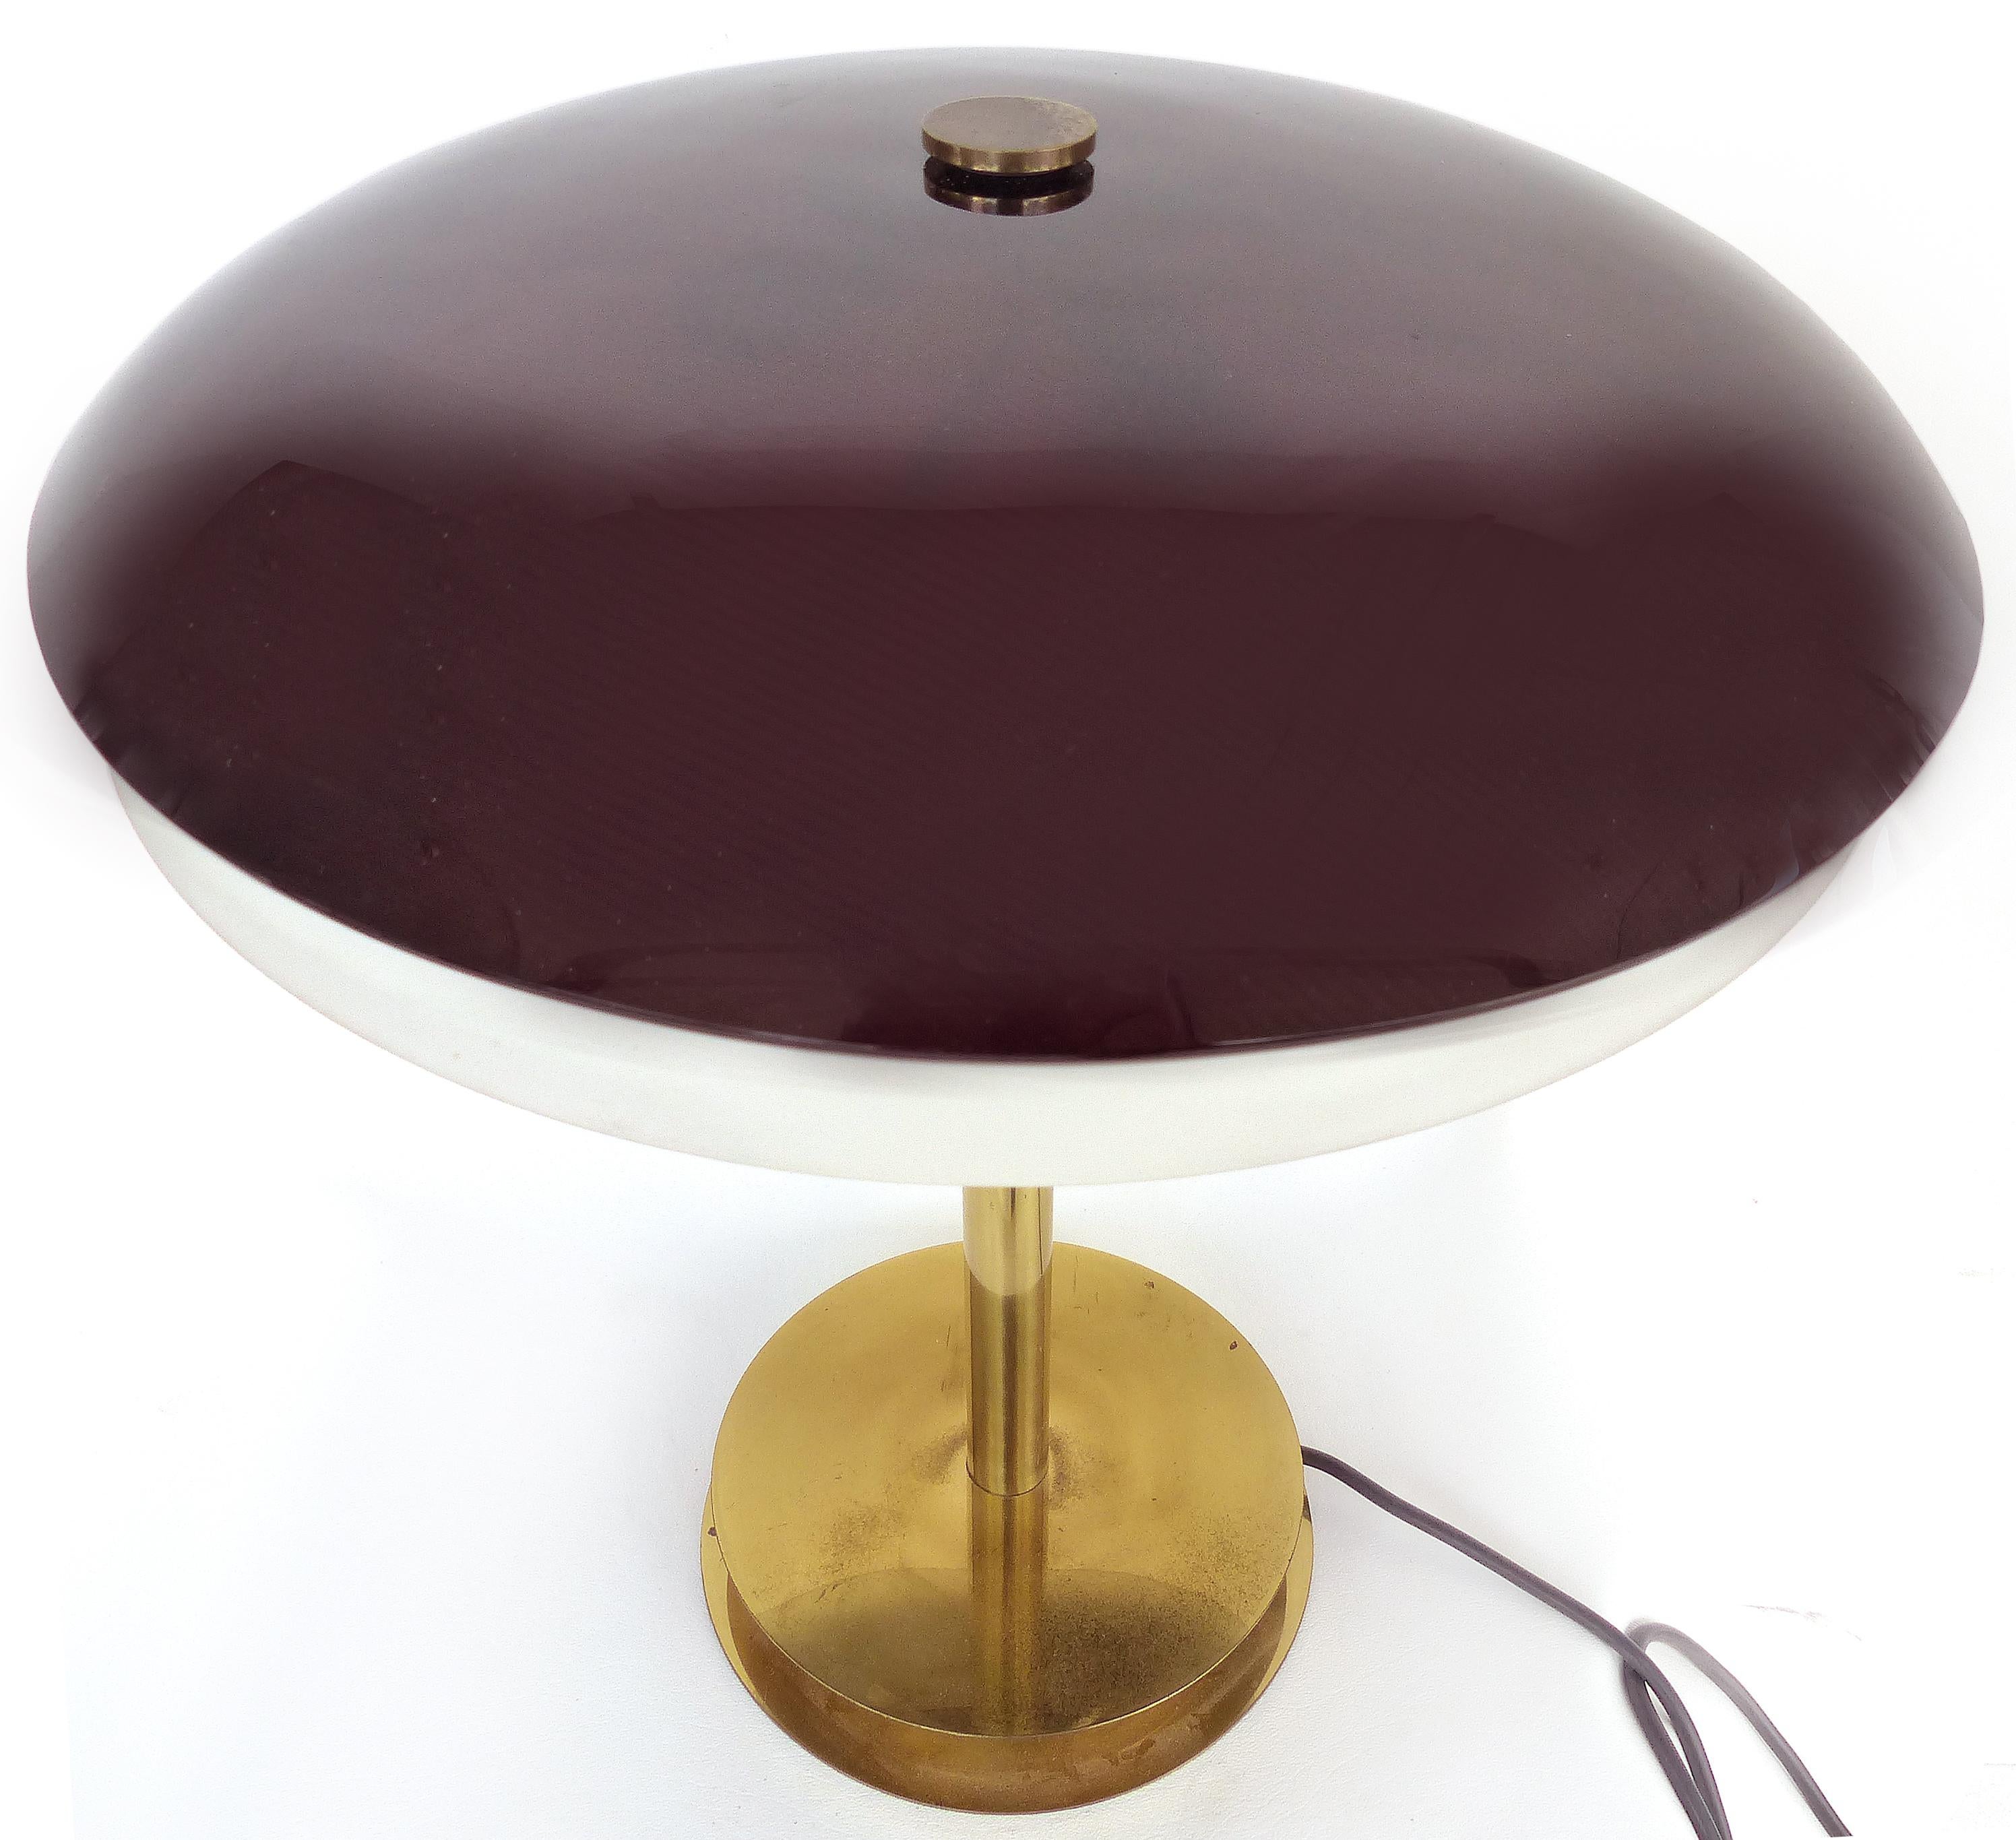 Pietro Chiesa Fontana Arte Bis/Tris red glass table lamp in brass, signed


Offered for sale is a fabulous and rare Pietro Chiesa for Fontana Arte Bis/Tris glass and brass table lamp. The lamp is created with a dark red bowl form shade with a